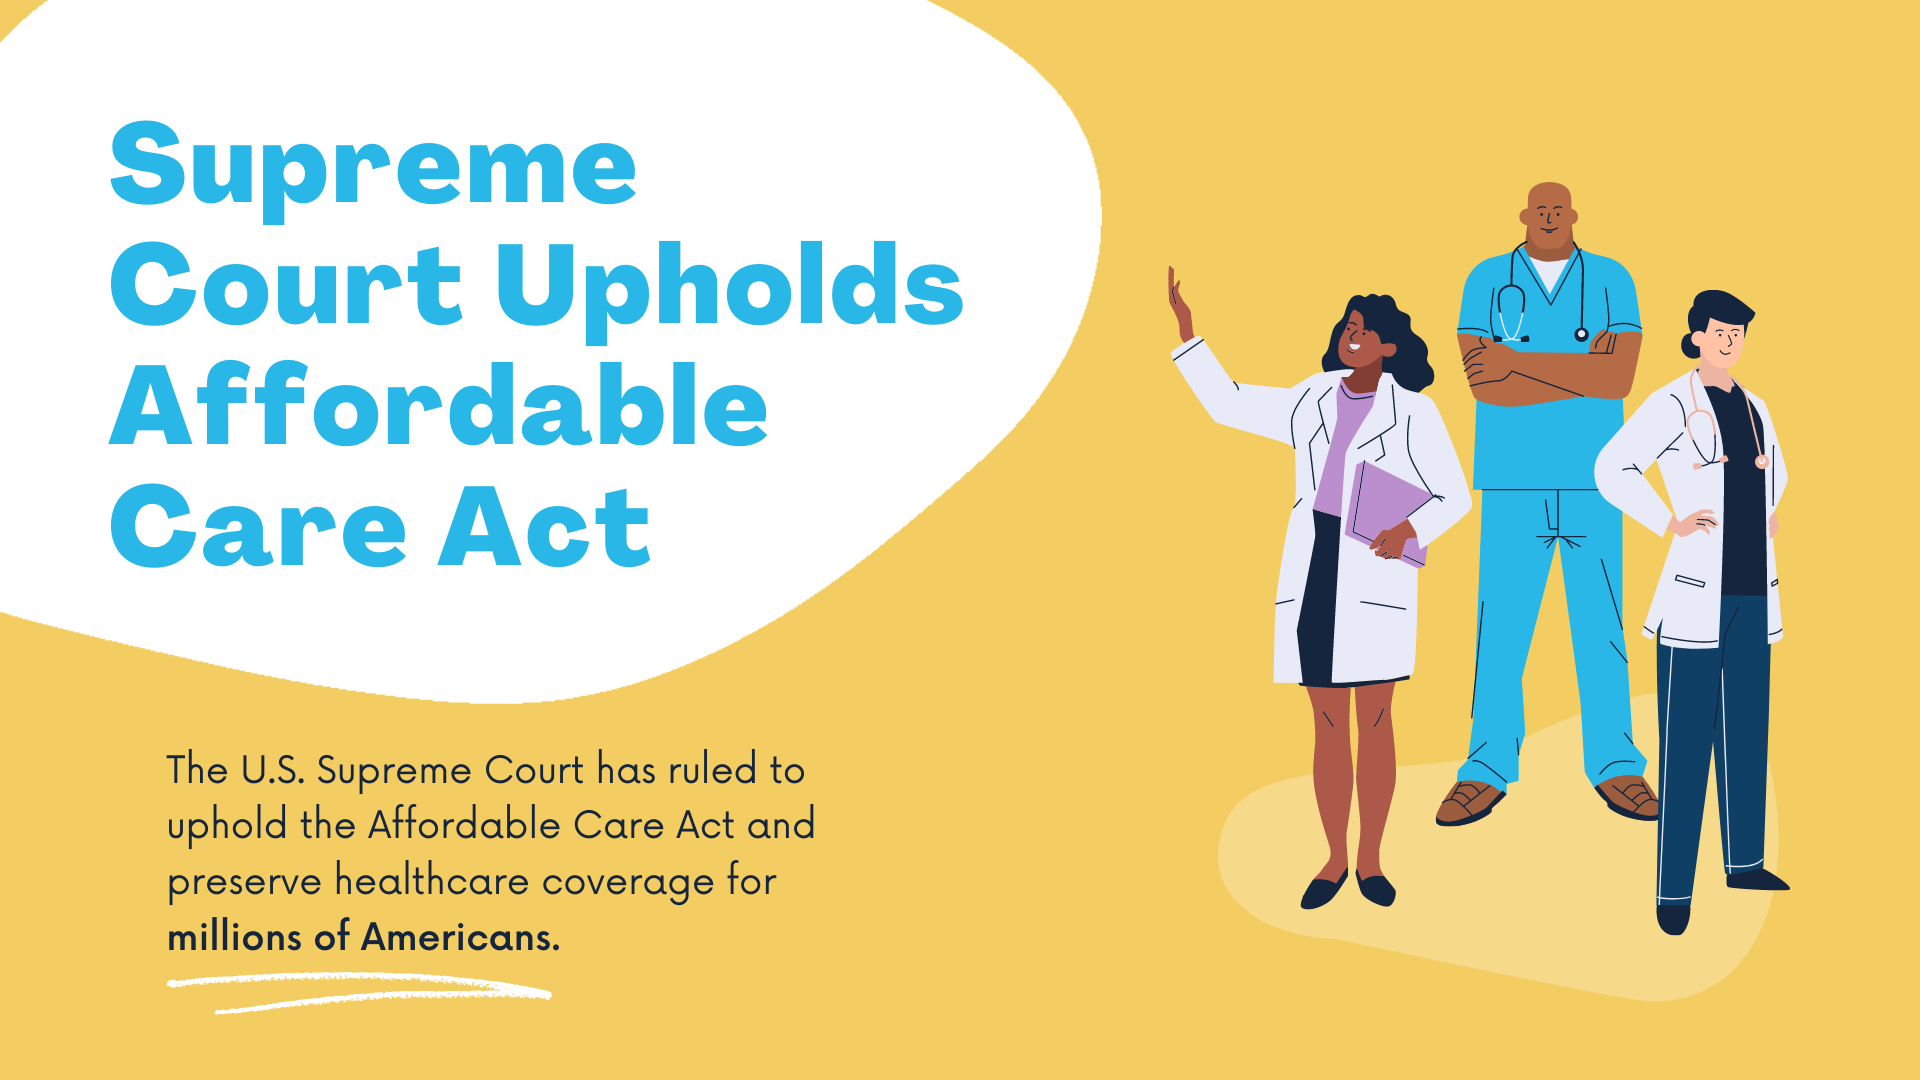 Affordable Care Act